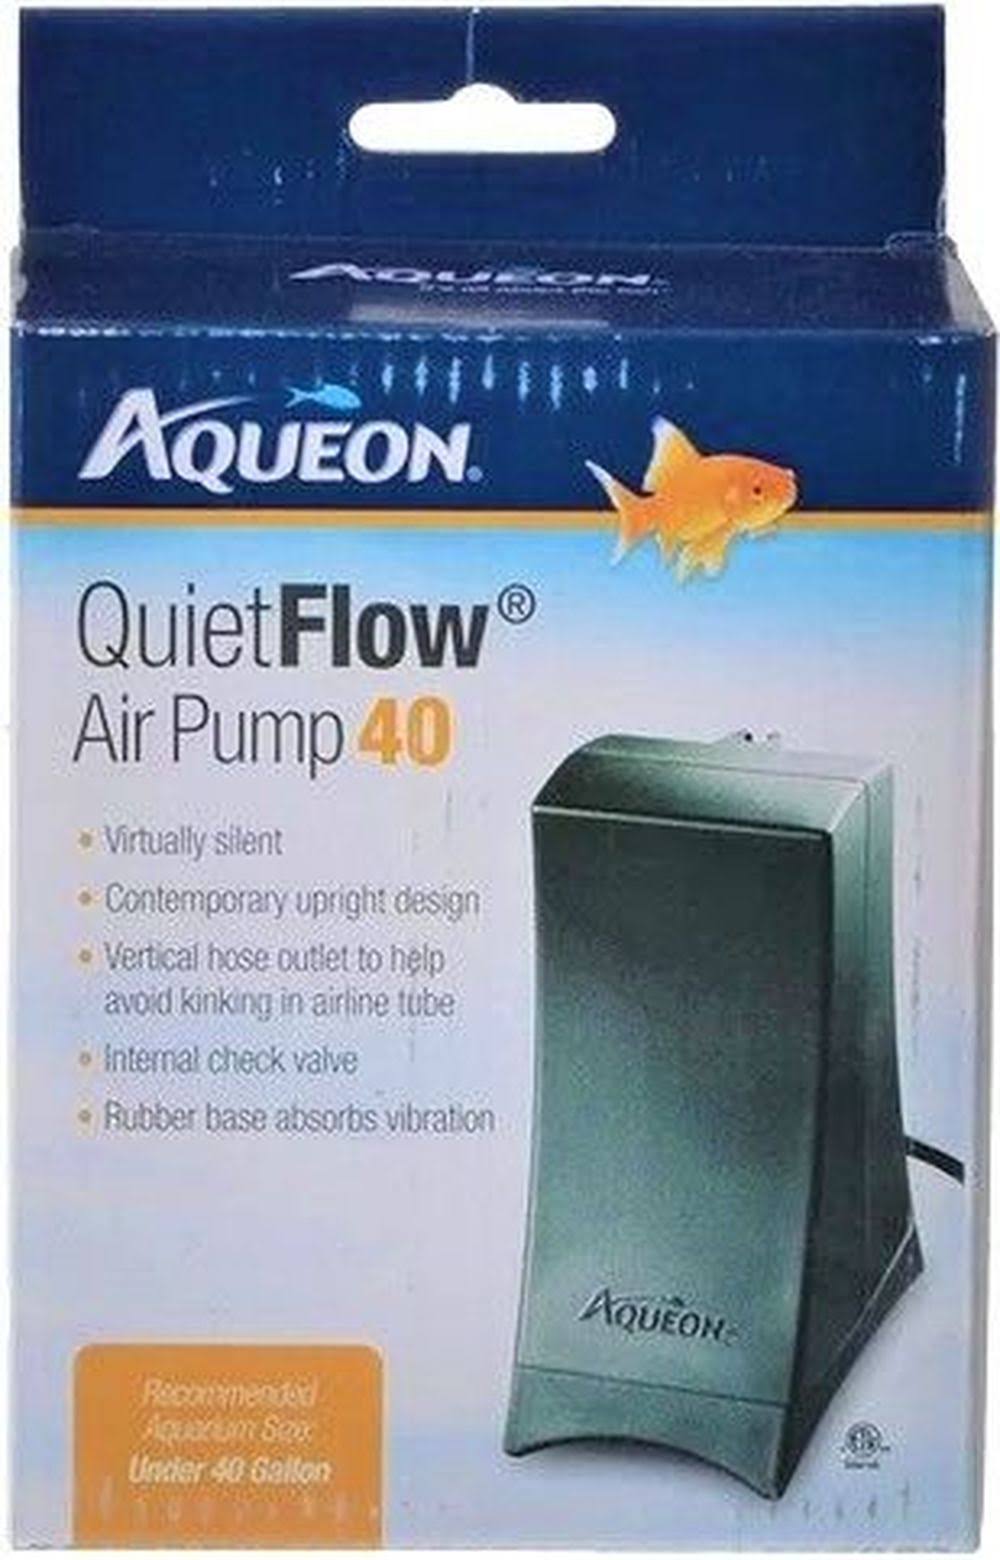 Aqueon Quiet Flow 40 Air Pump - for Tanks up to 40 Gallons